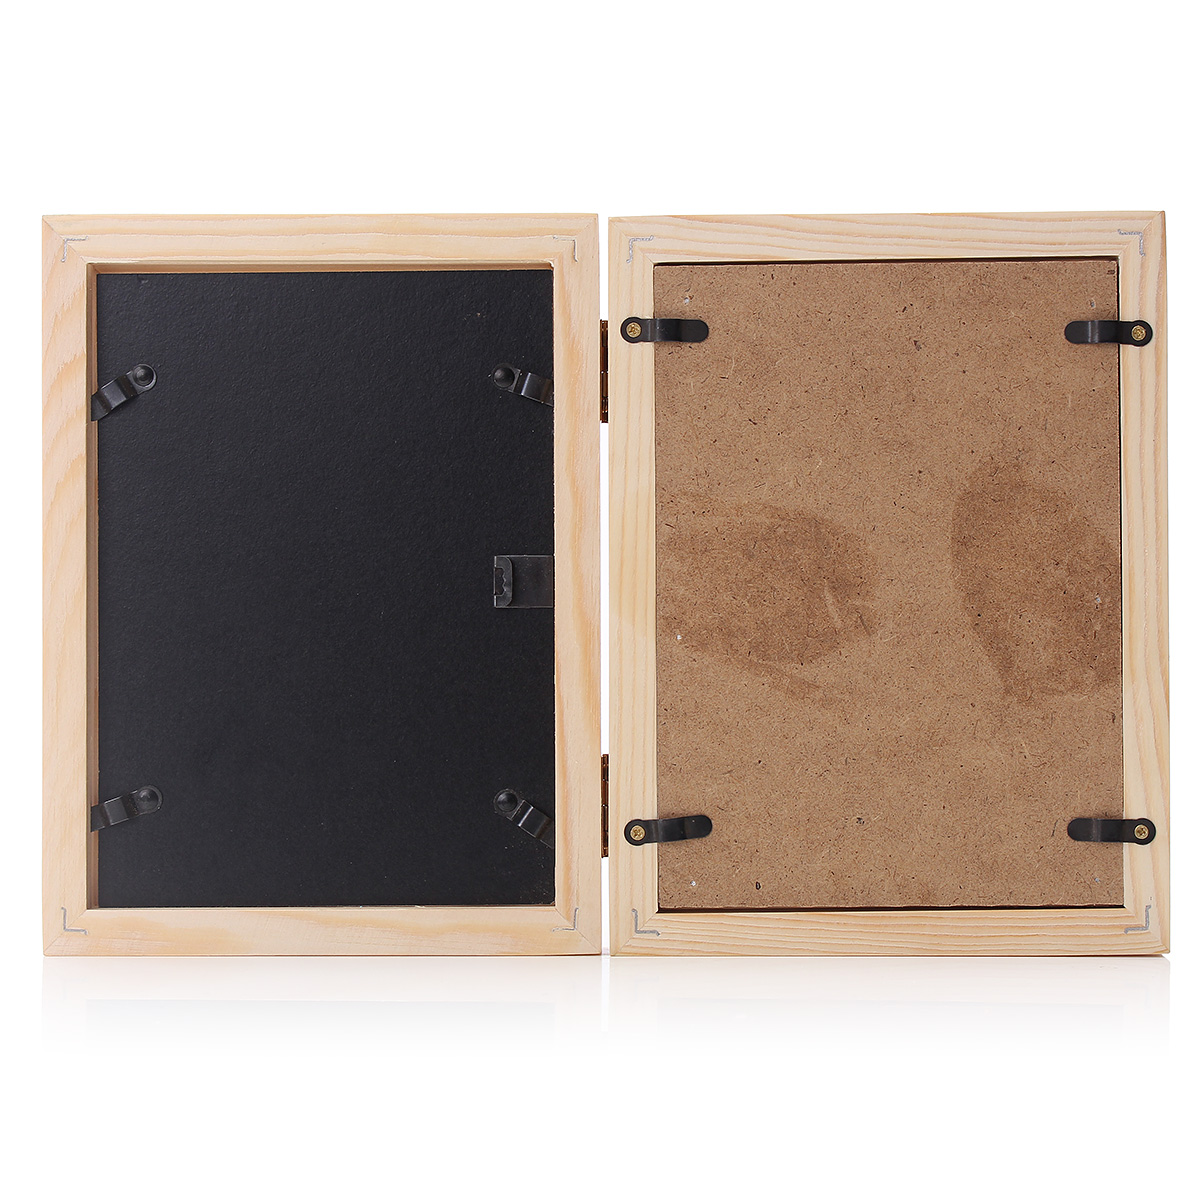 New-Born-Baby-Hand-Foot-Print-Soft-Clay-Photo-Frame-1632981-3